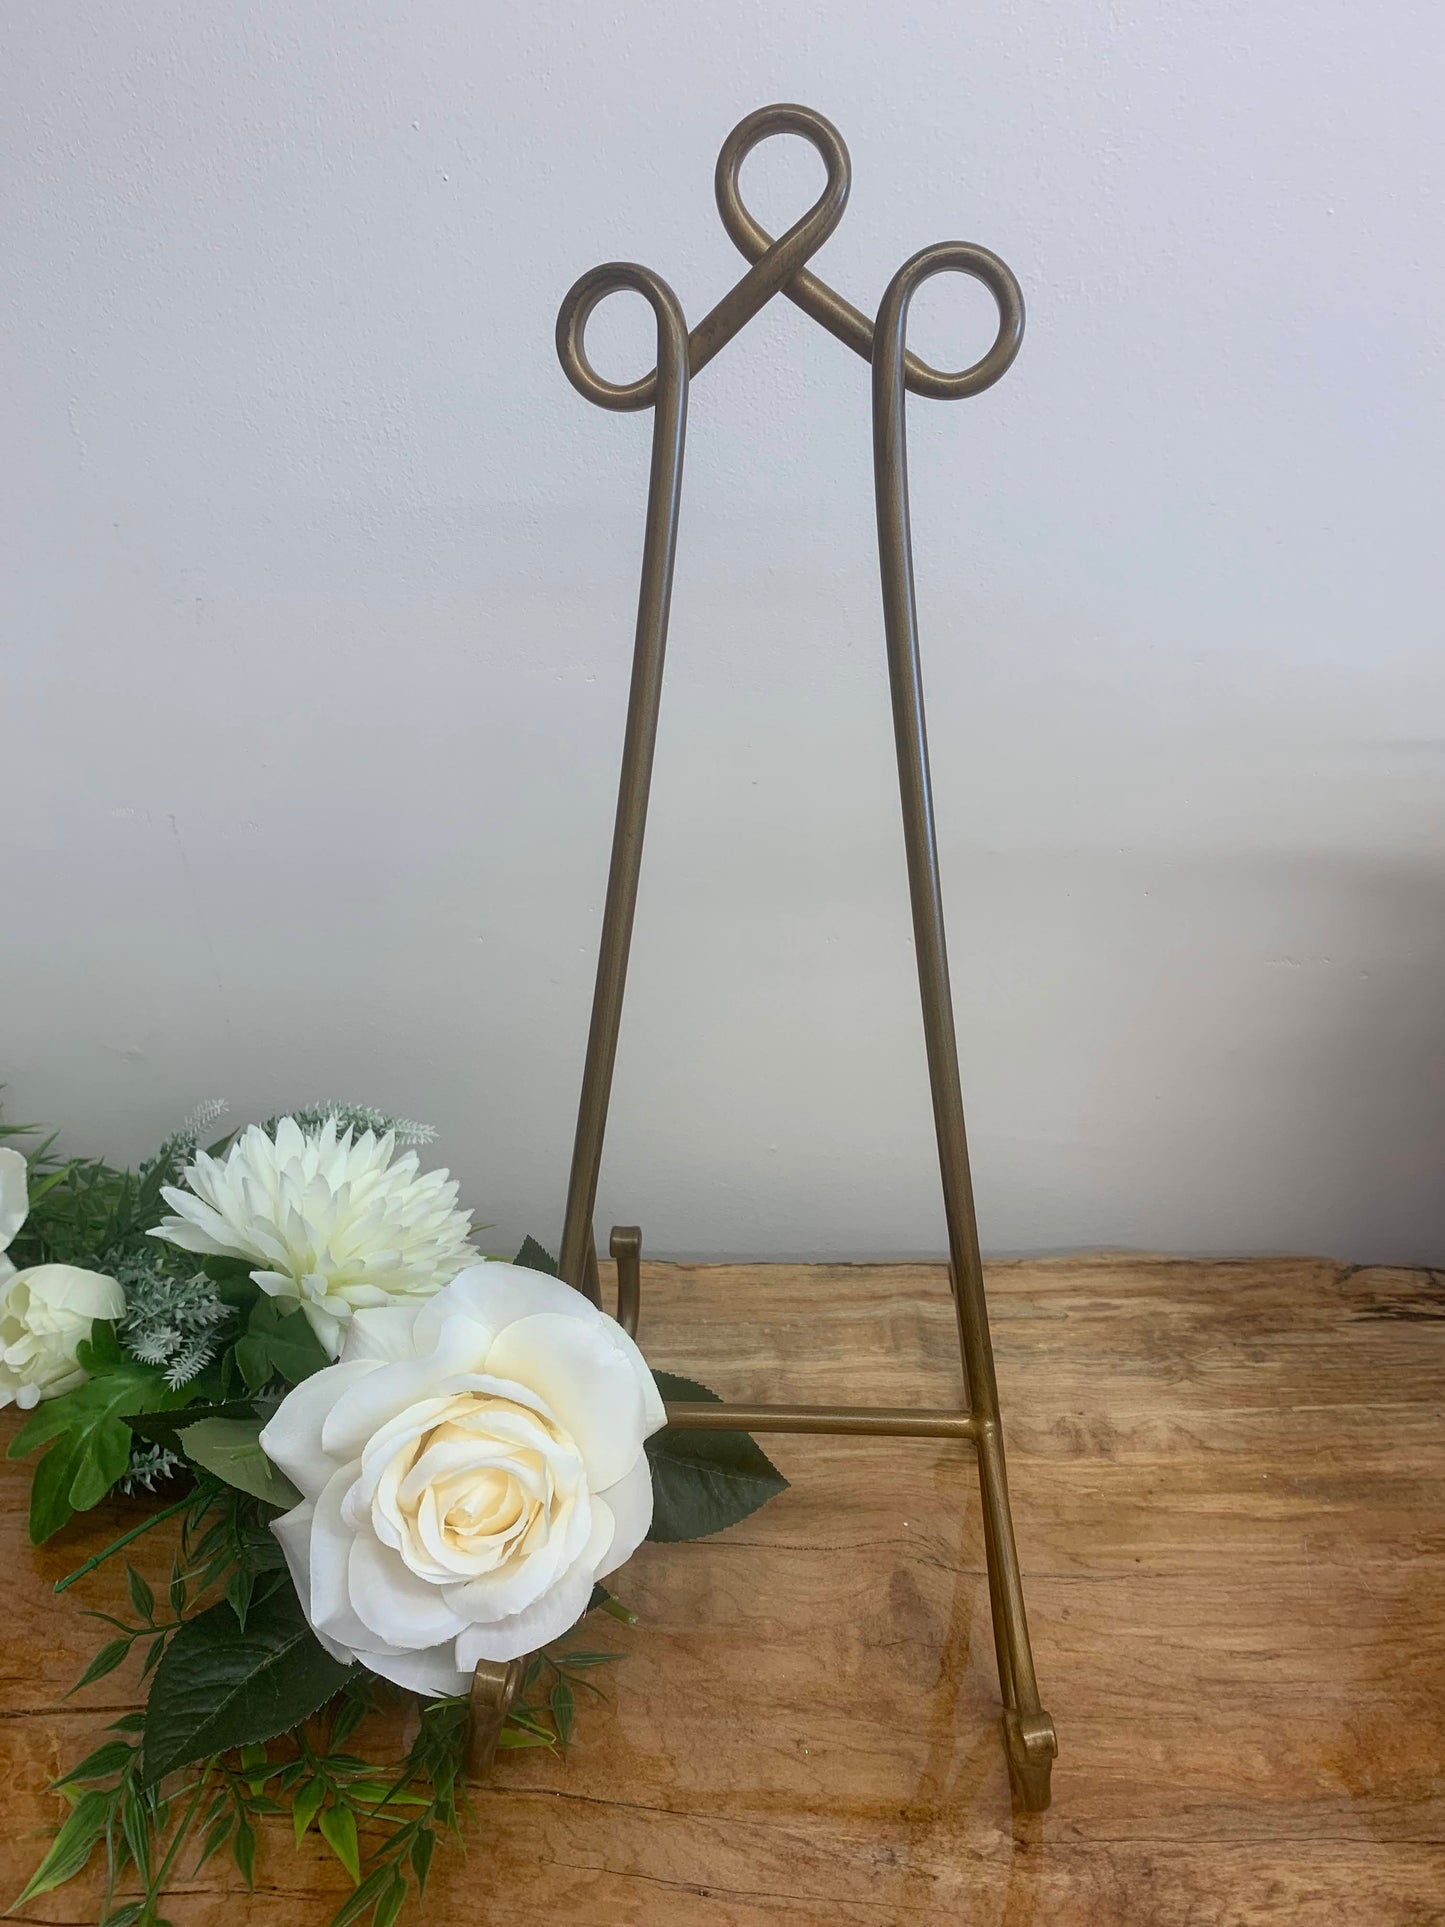 Gold Tabletop Easel